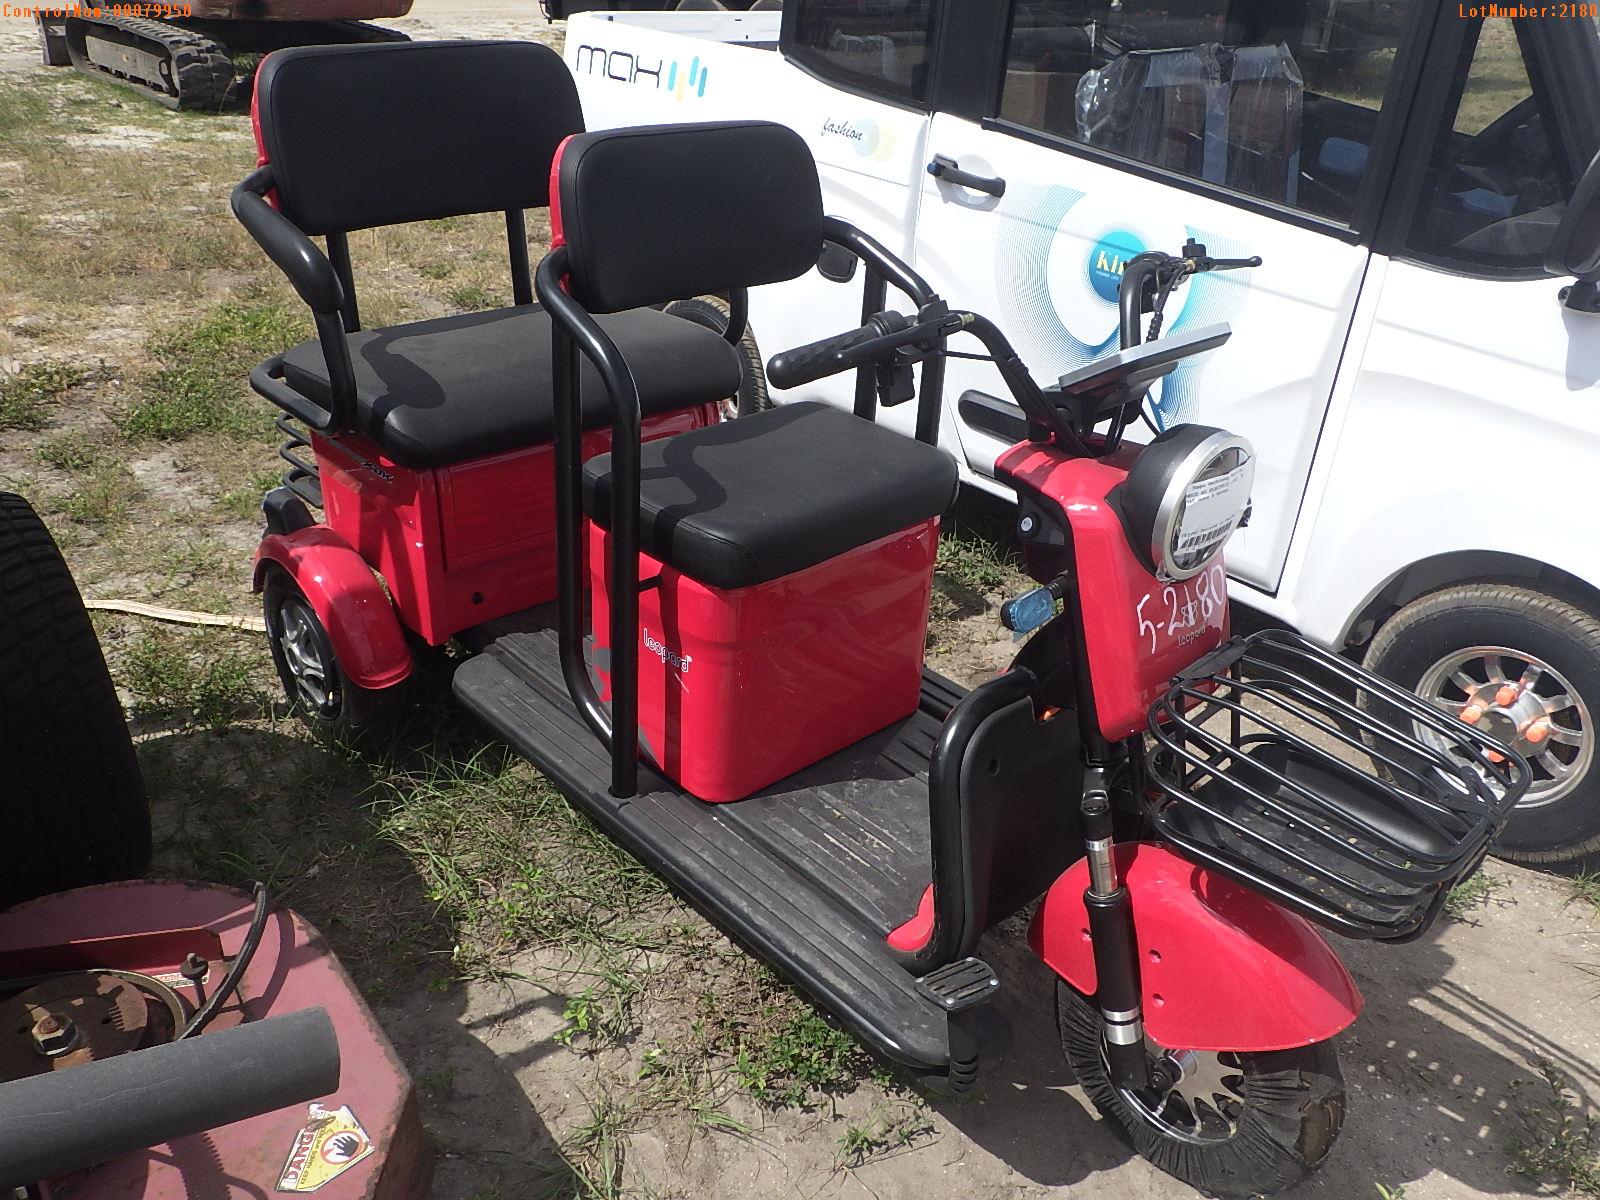 5-02180 (Equip.-Cart)  Seller:Private/Dealer MECO M3 ELECTRIC THREE WHEEL CART